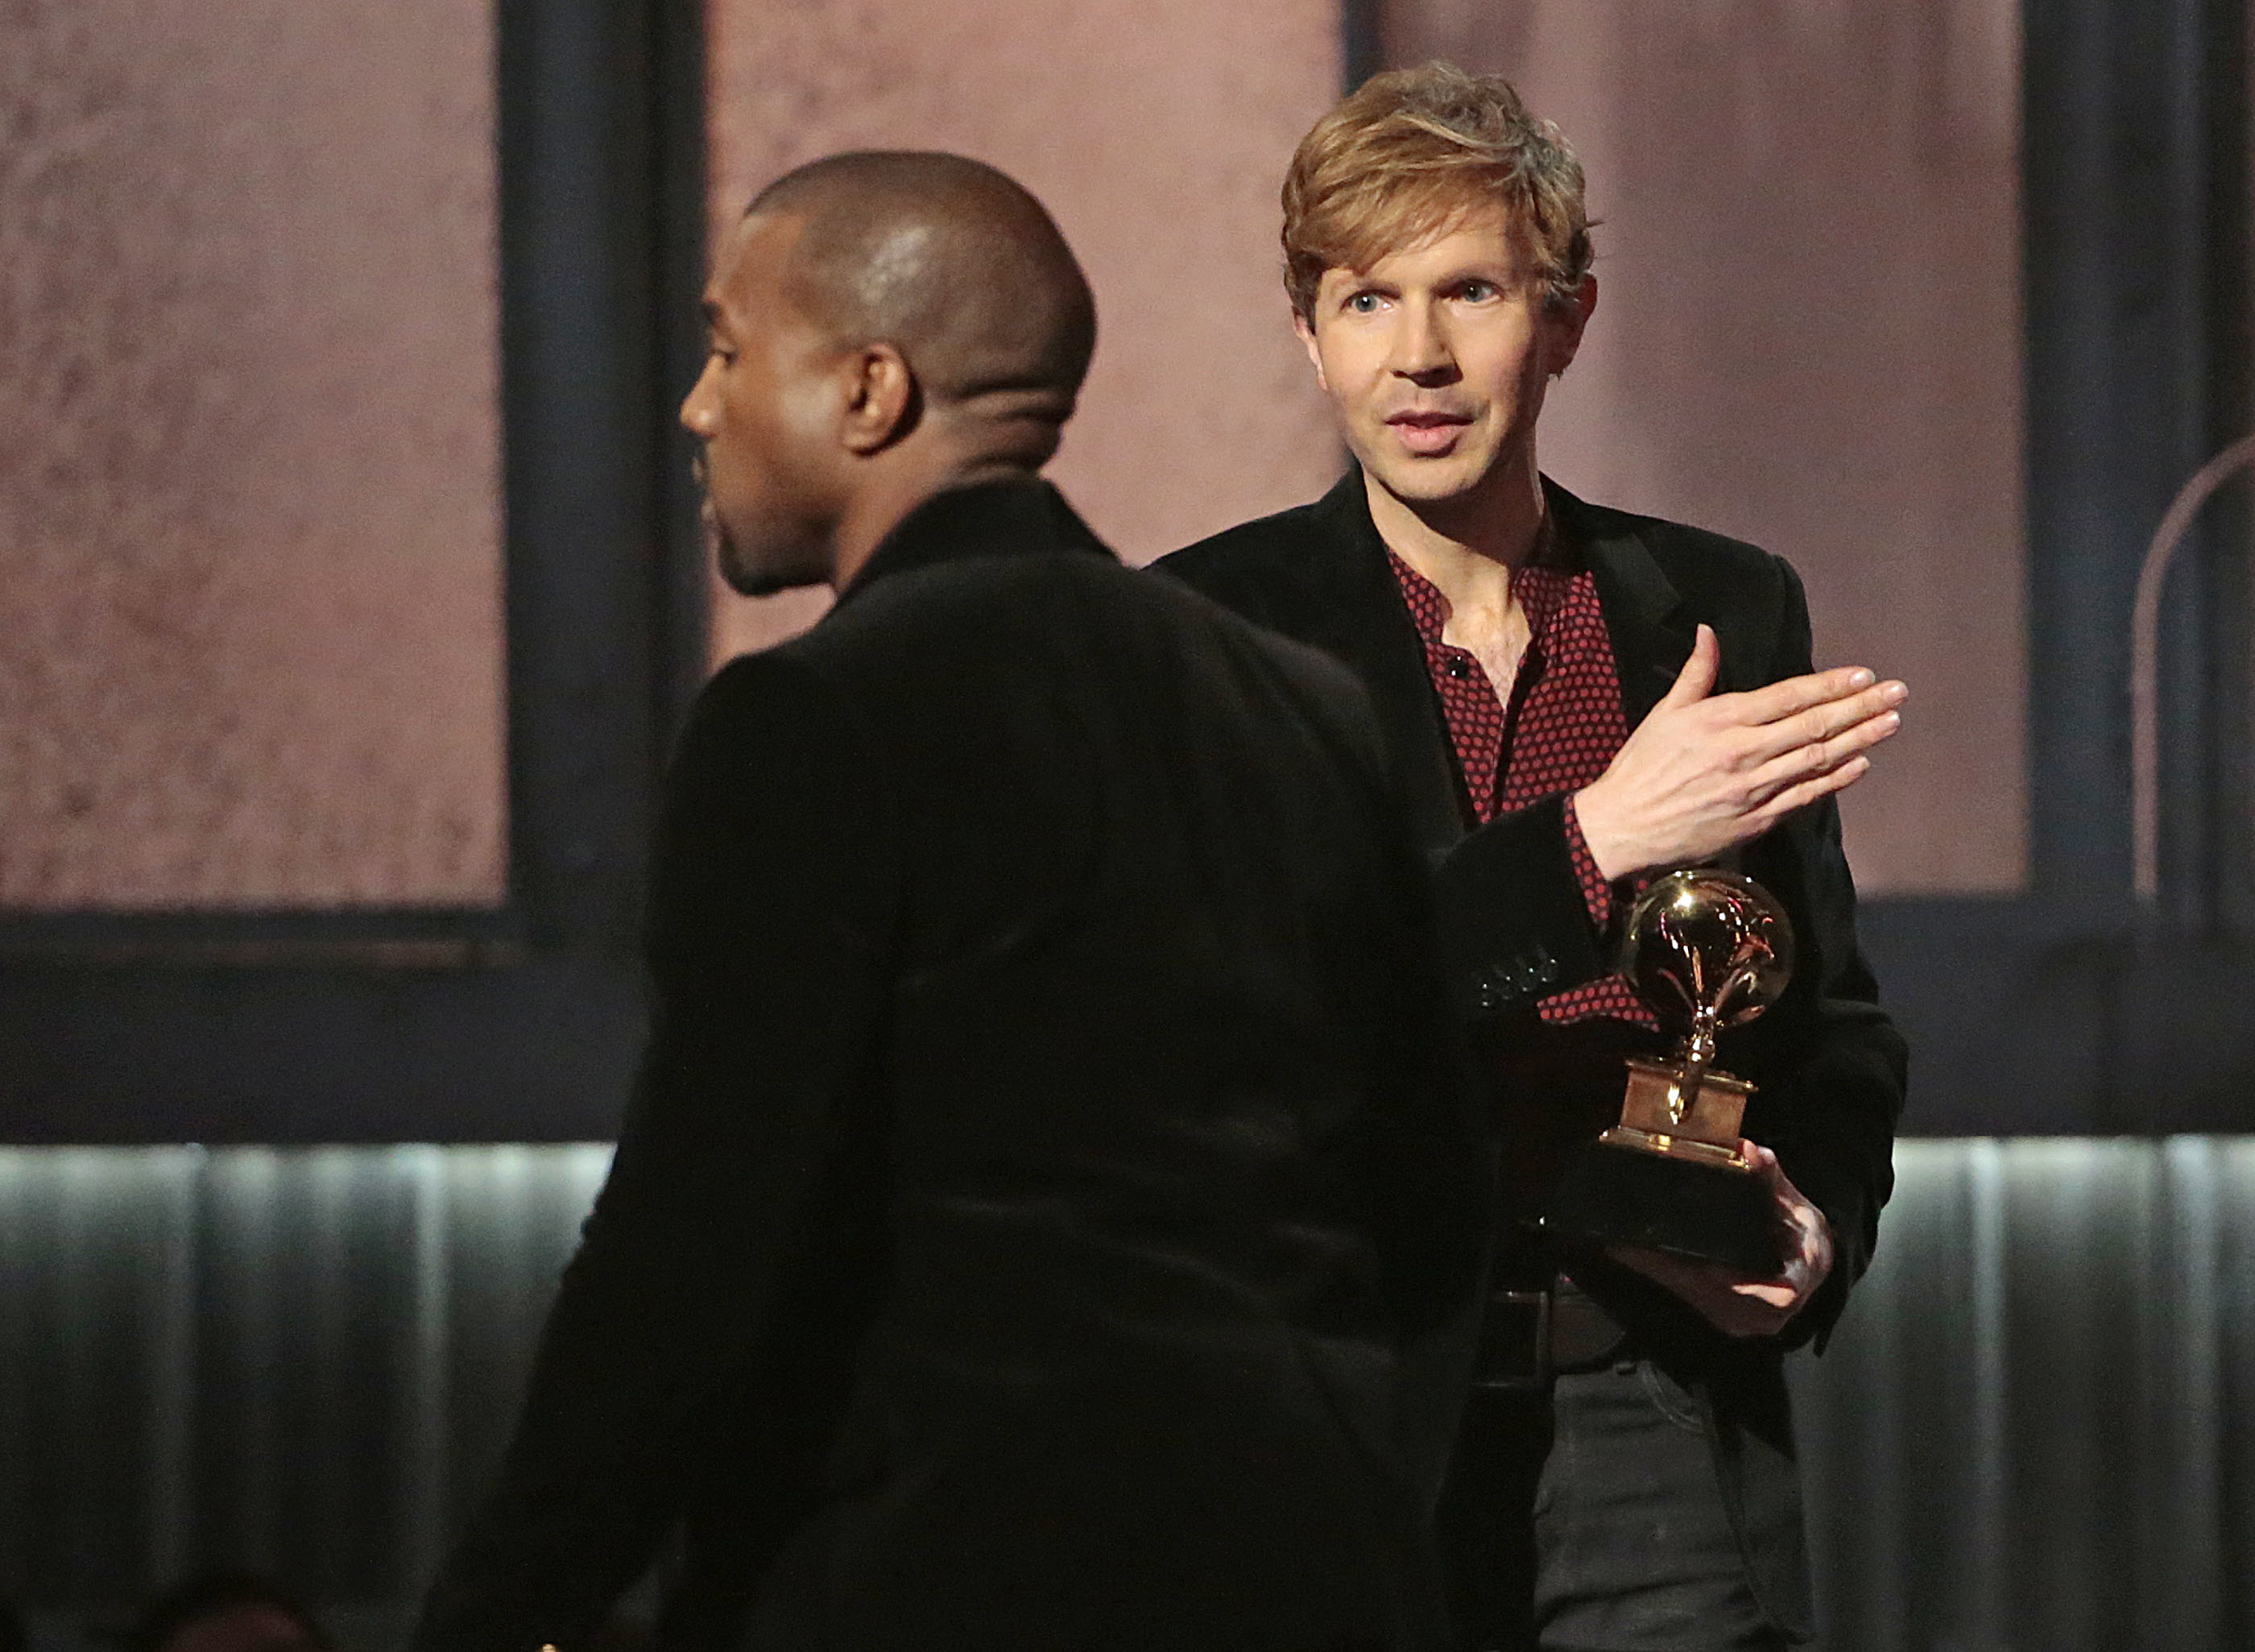 Kanye West and Beck onstage at the Grammys